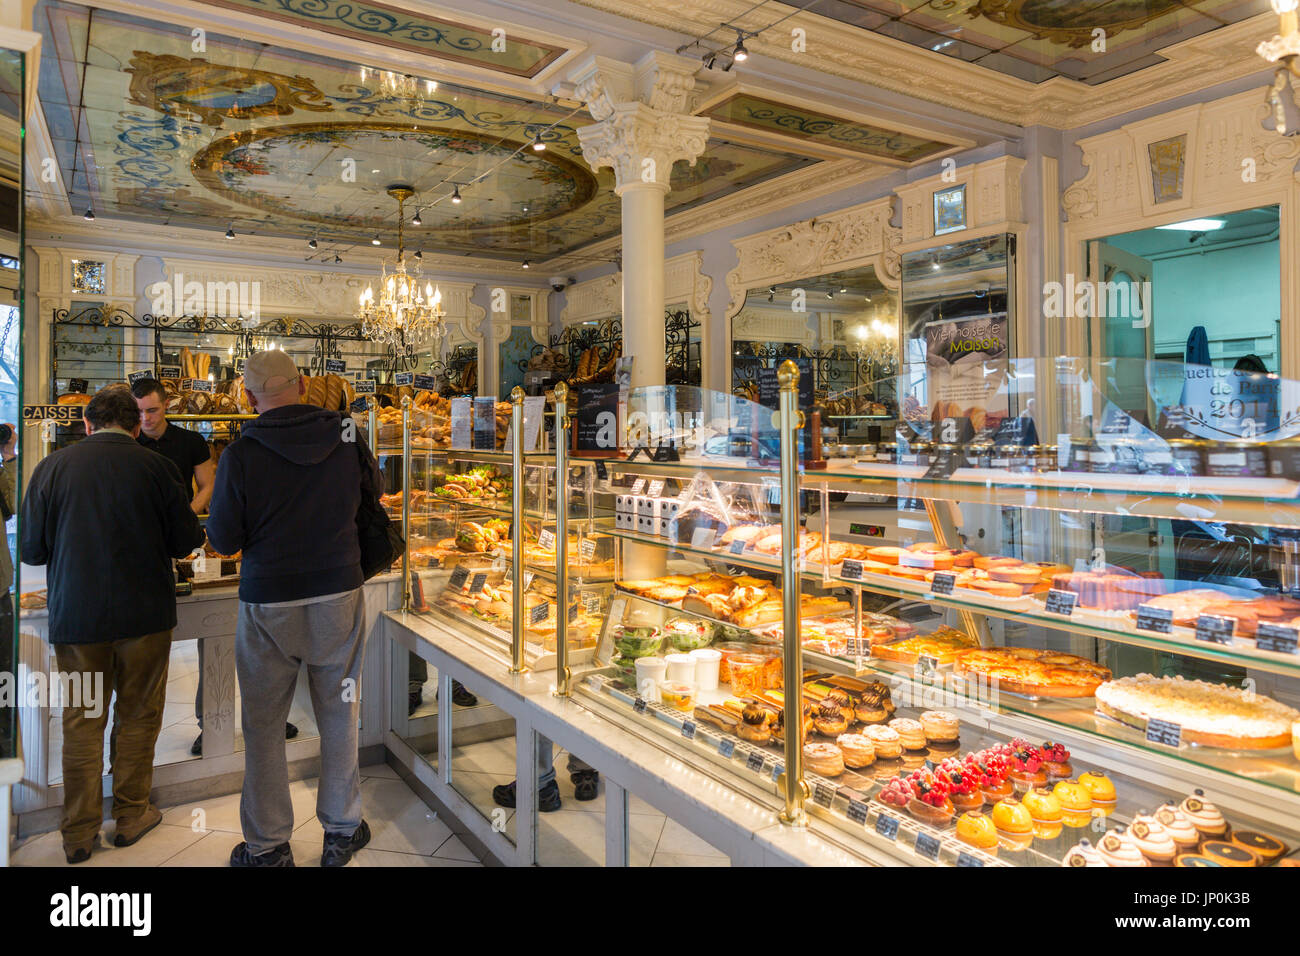 Paris, France - March 2, 2016: Interior of a classic Paris bakery and bread shop with people buying their daily bread. There are many classic boulangeries and patisseries in Paris with beautiful vintage decor. Stock Photo